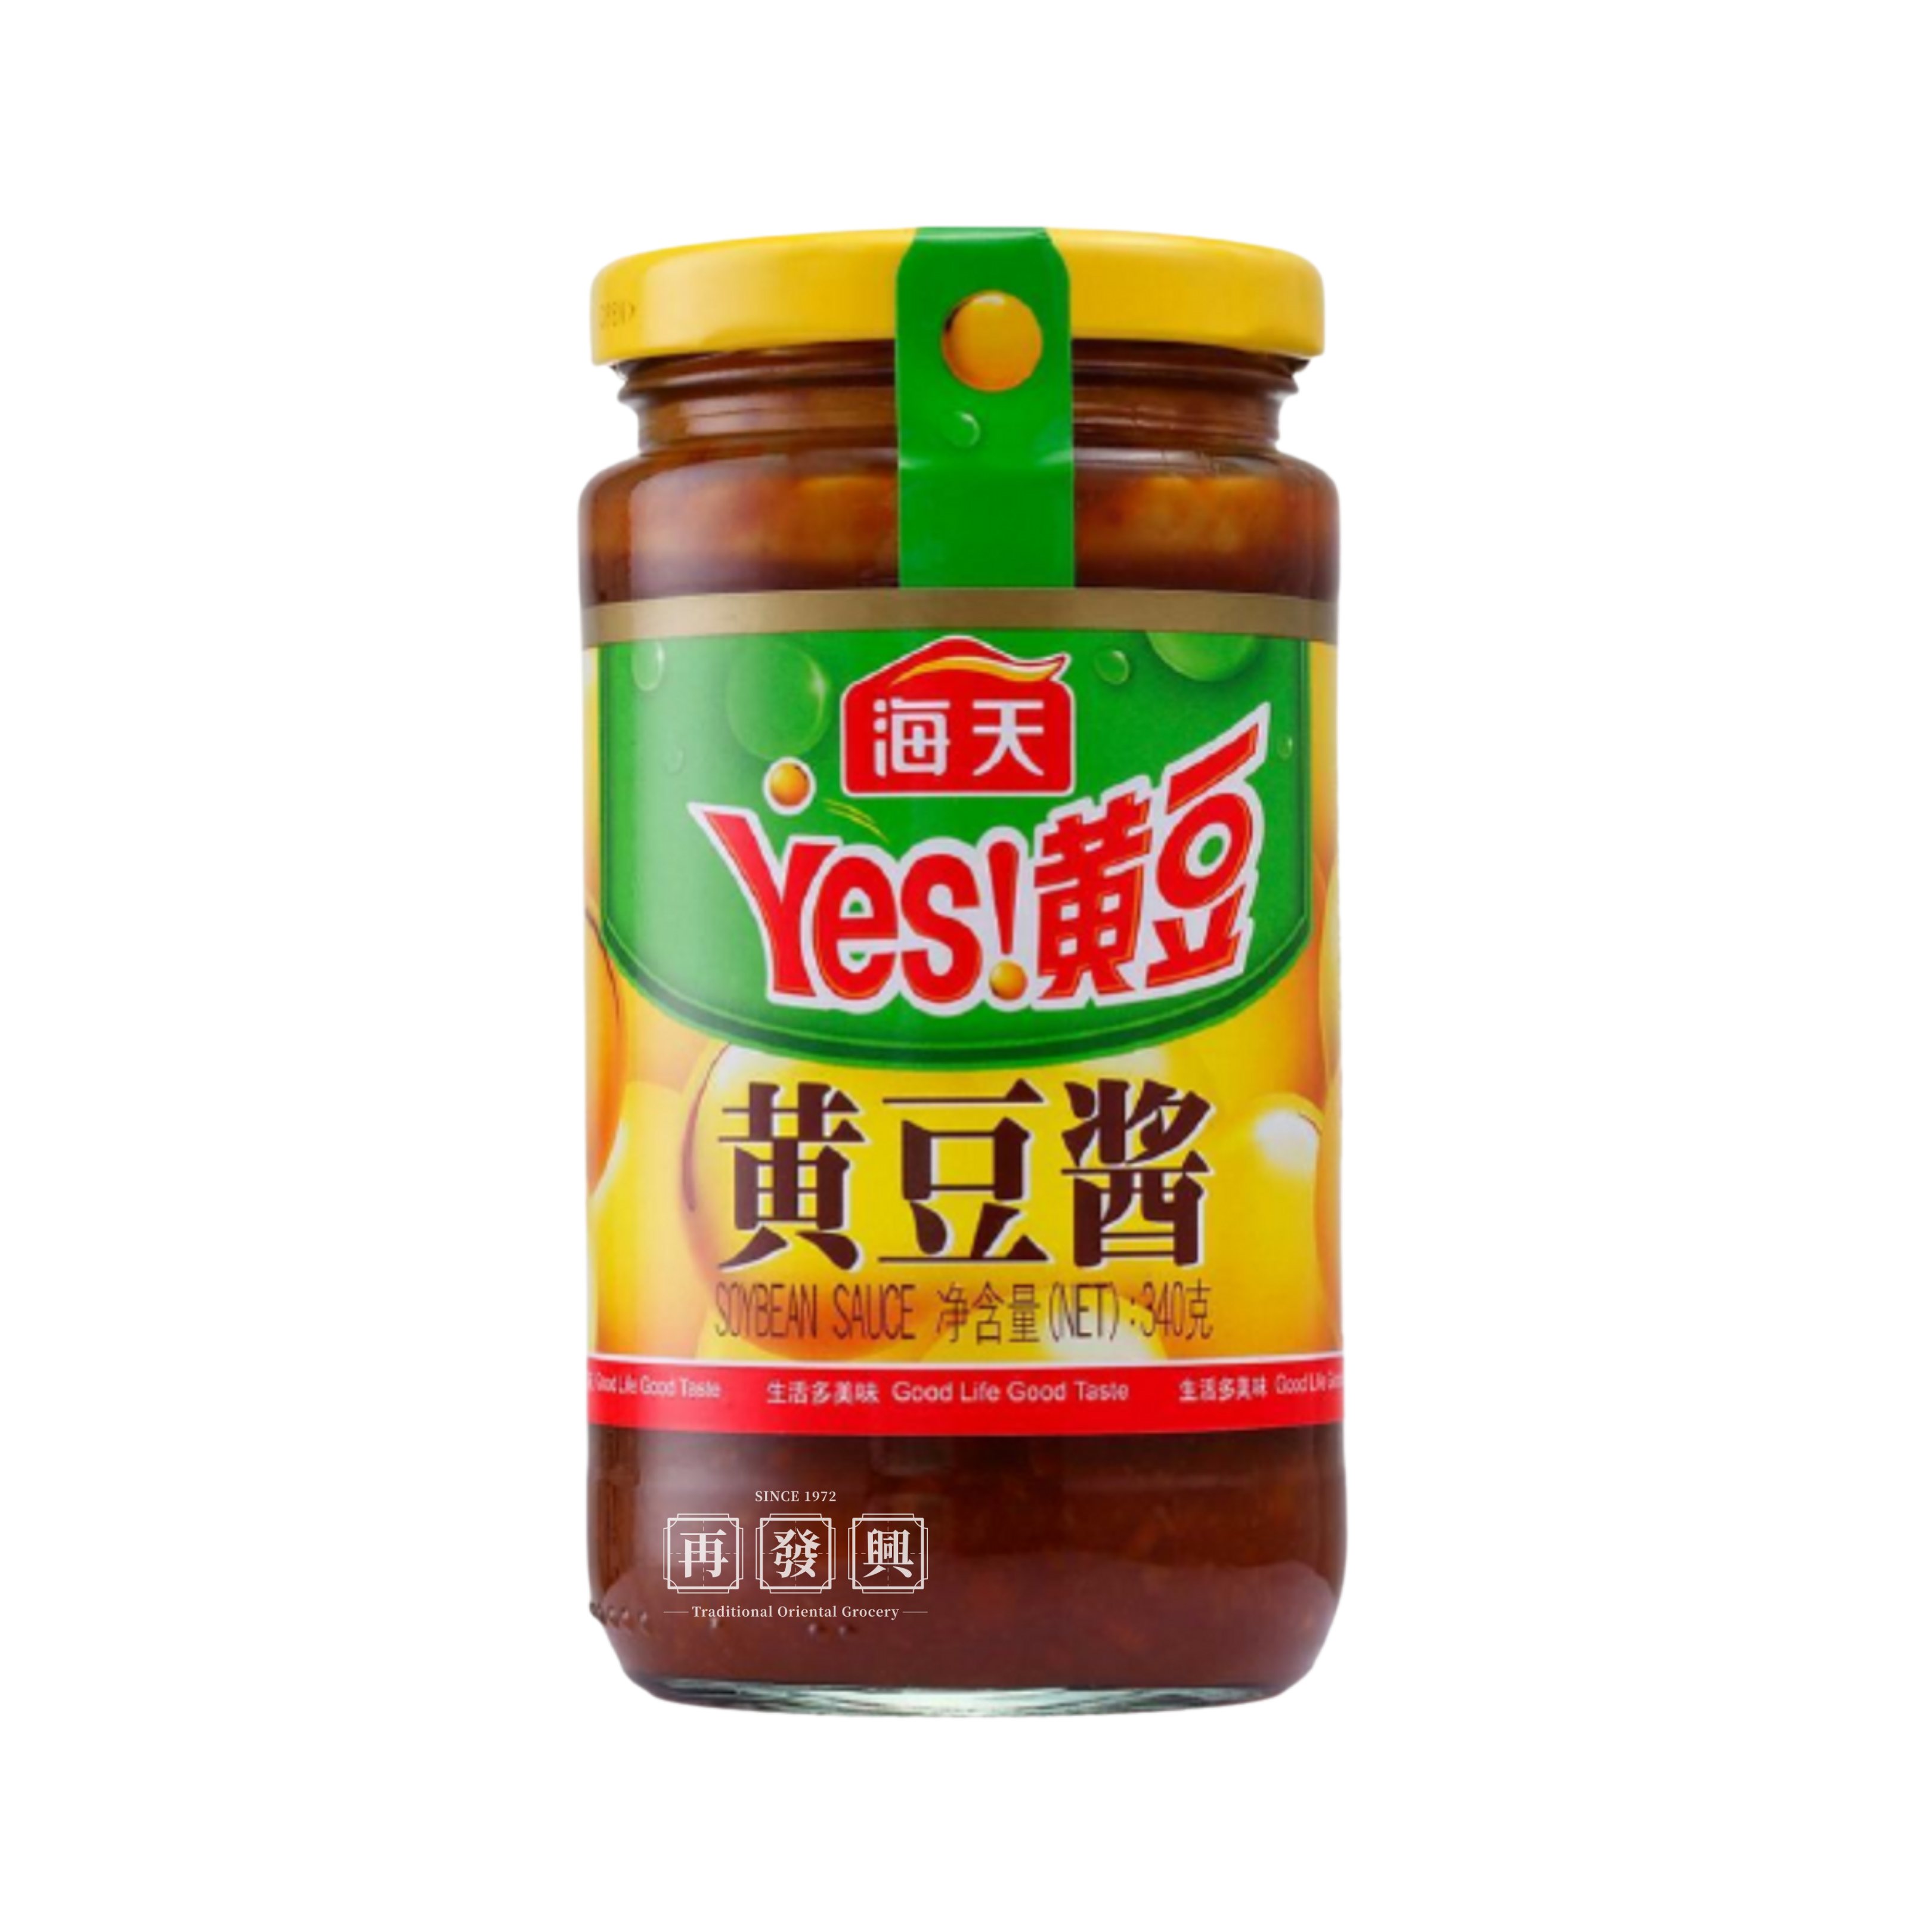 Haday Yes! Soy Bean Sauce 240g